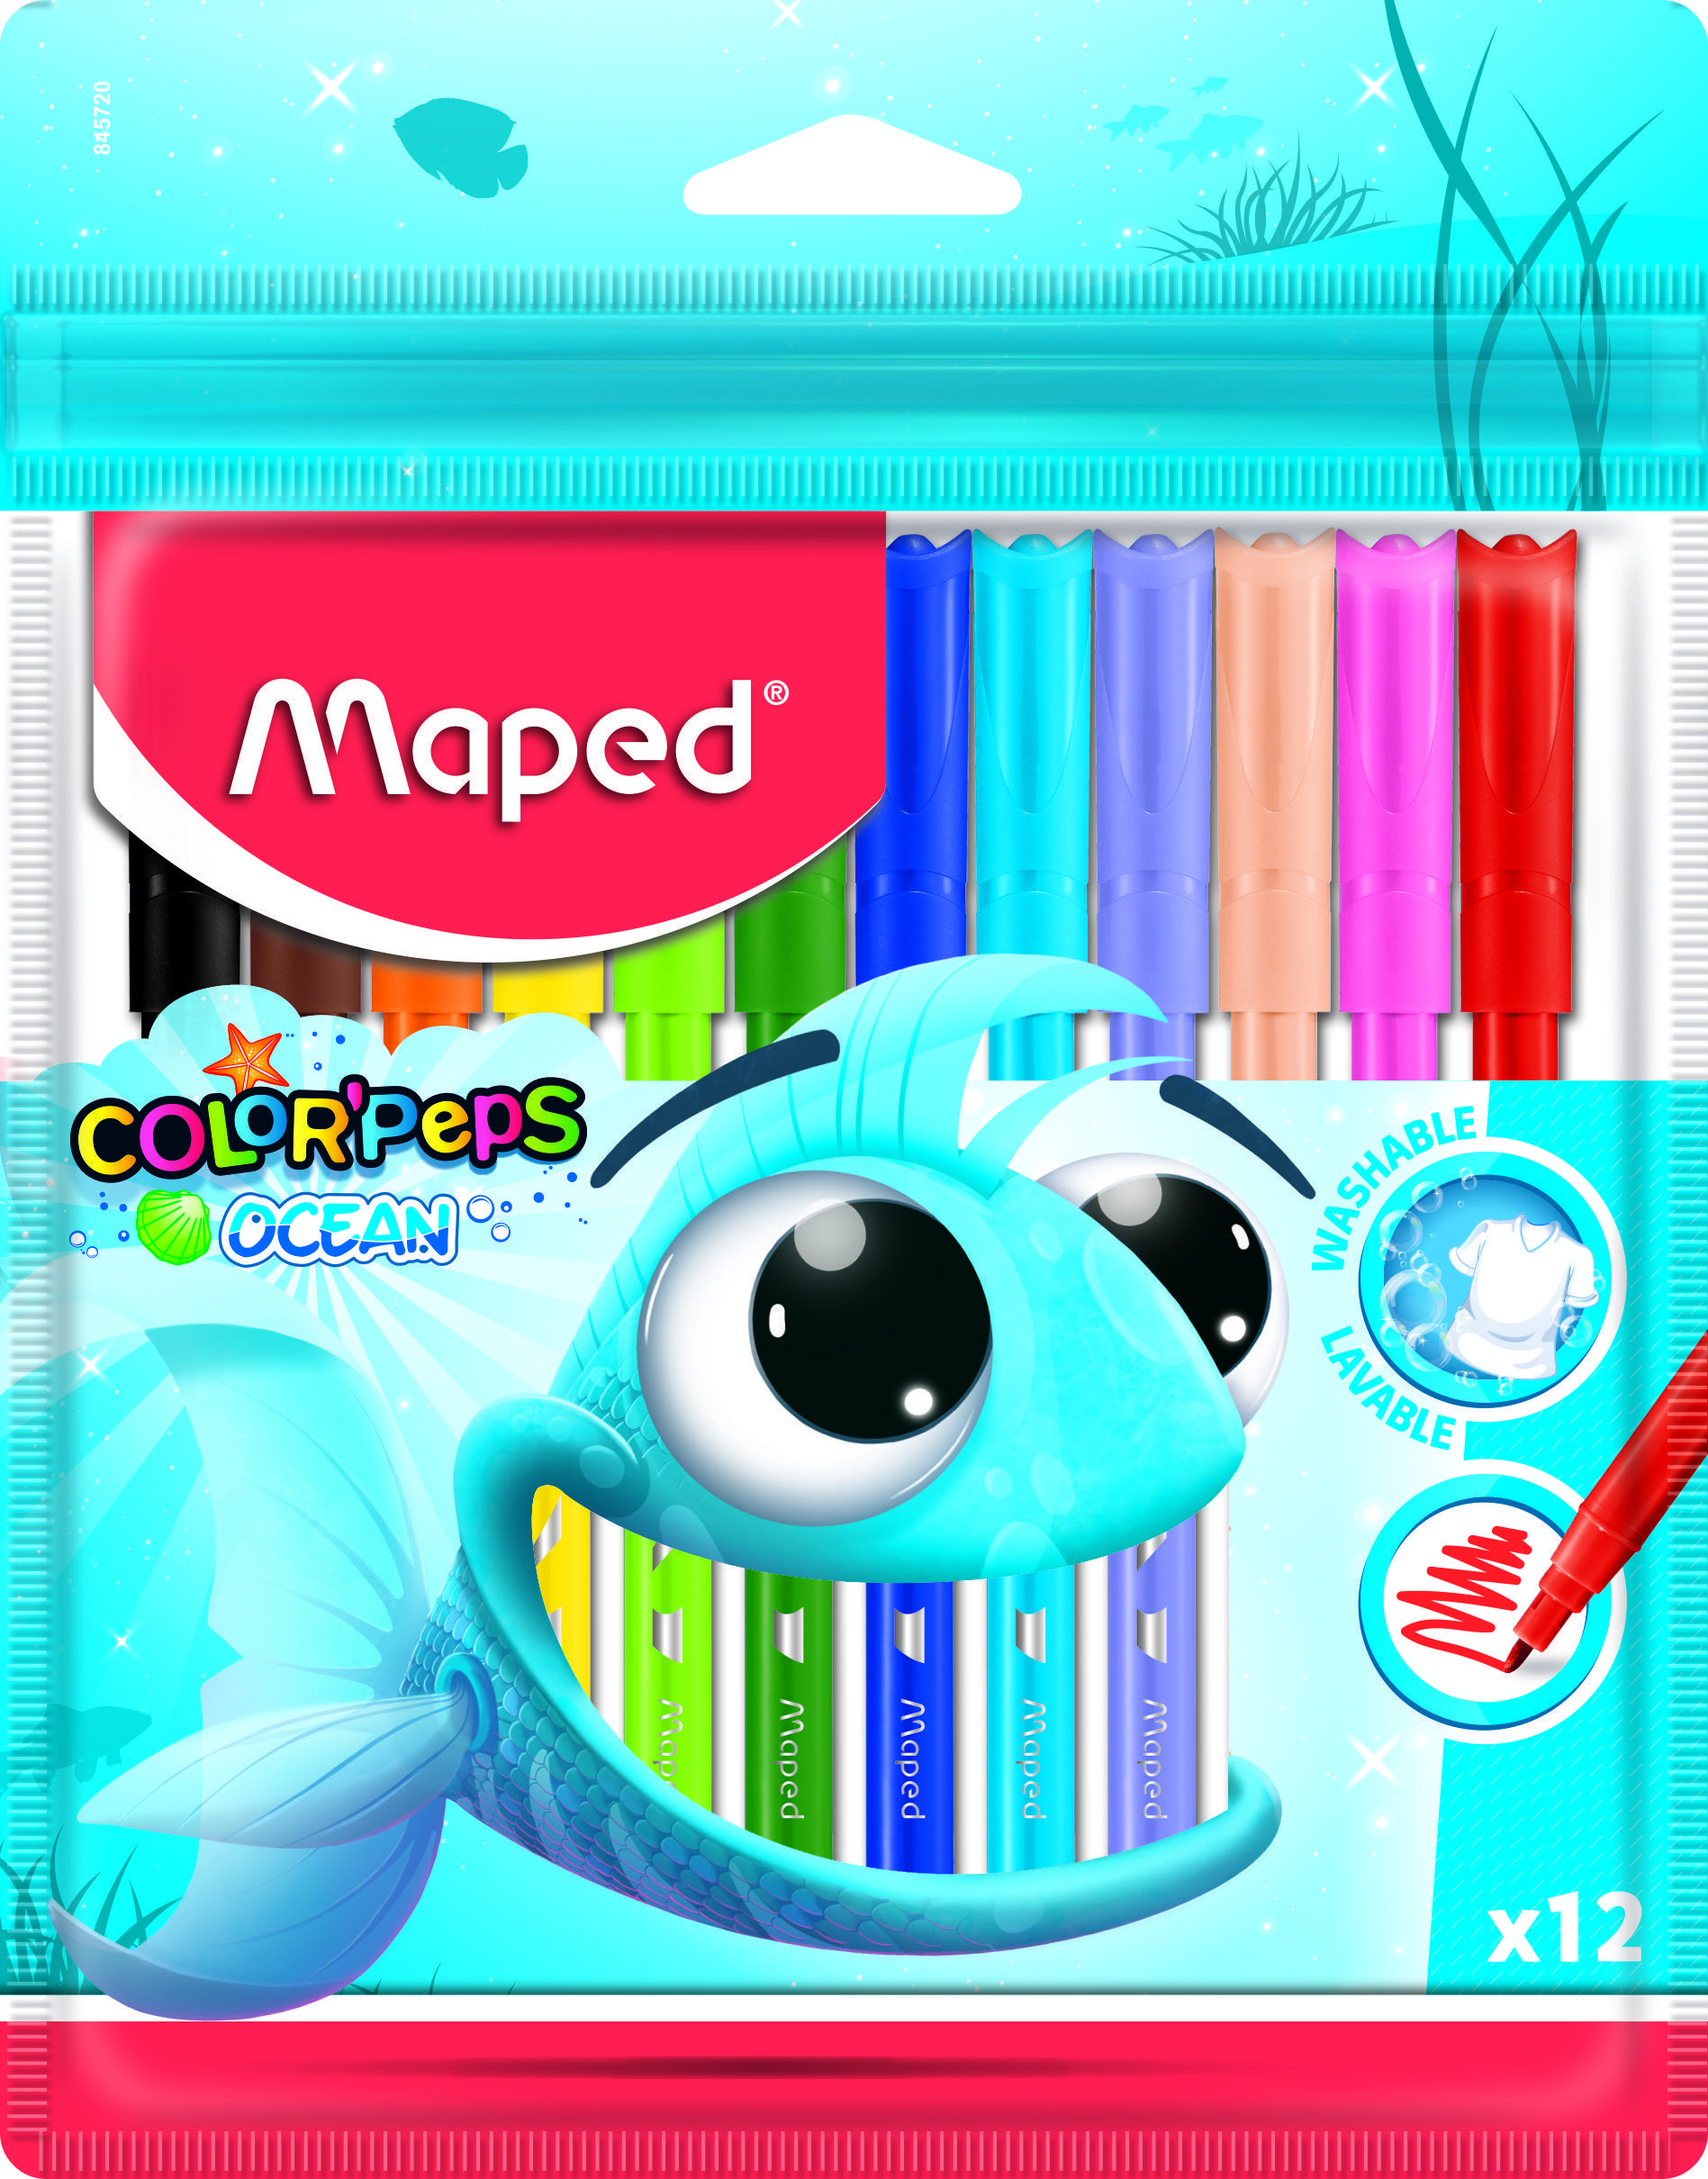  MAPED COLOR'PEPS OCEAN     -   ,    12 